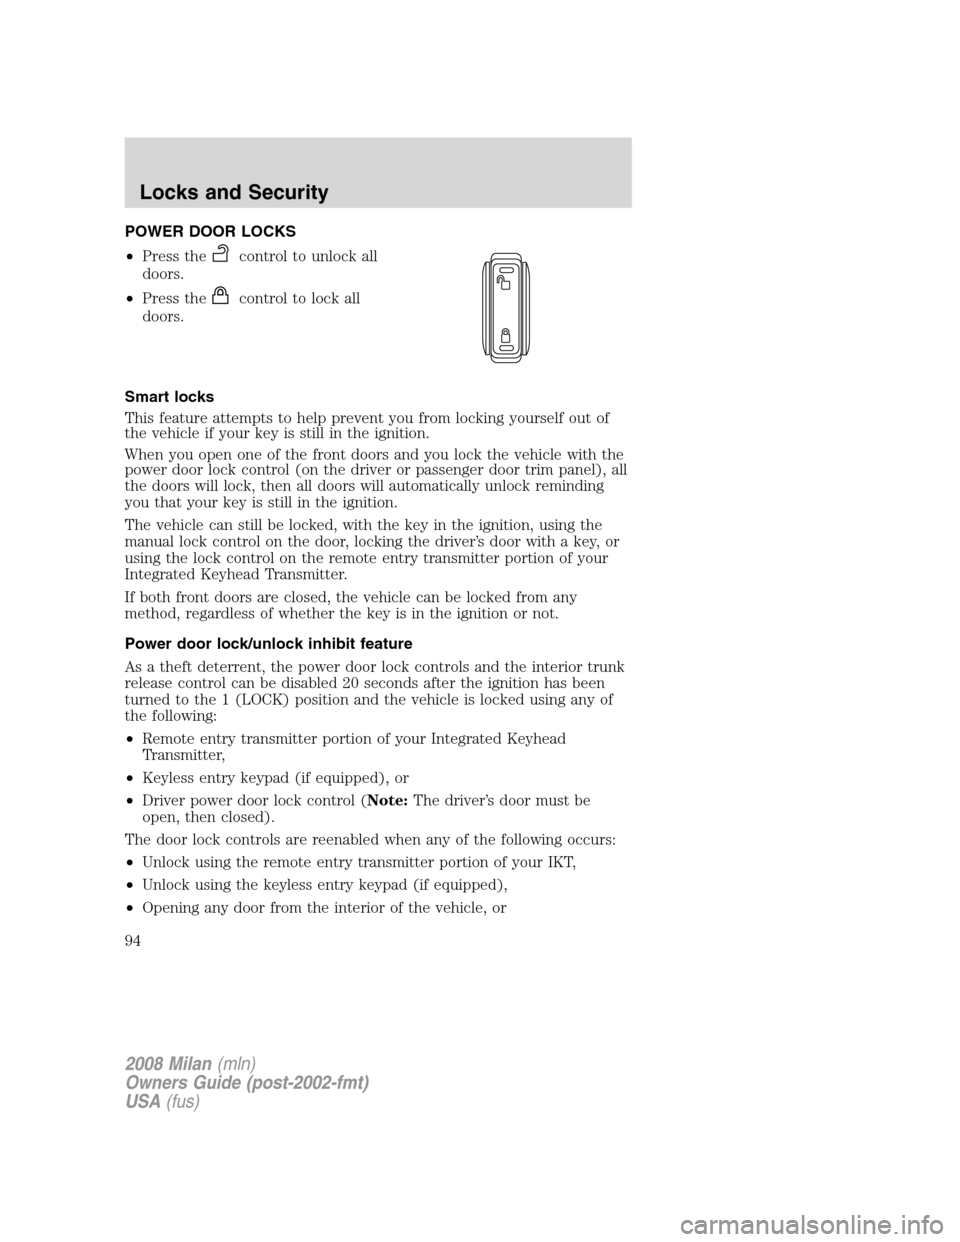 Mercury Milan 2008  Owners Manuals POWER DOOR LOCKS
•Press the
control to unlock all
doors.
•Press the
control to lock all
doors.
Smart locks
This feature attempts to help prevent you from locking yourself out of
the vehicle if you